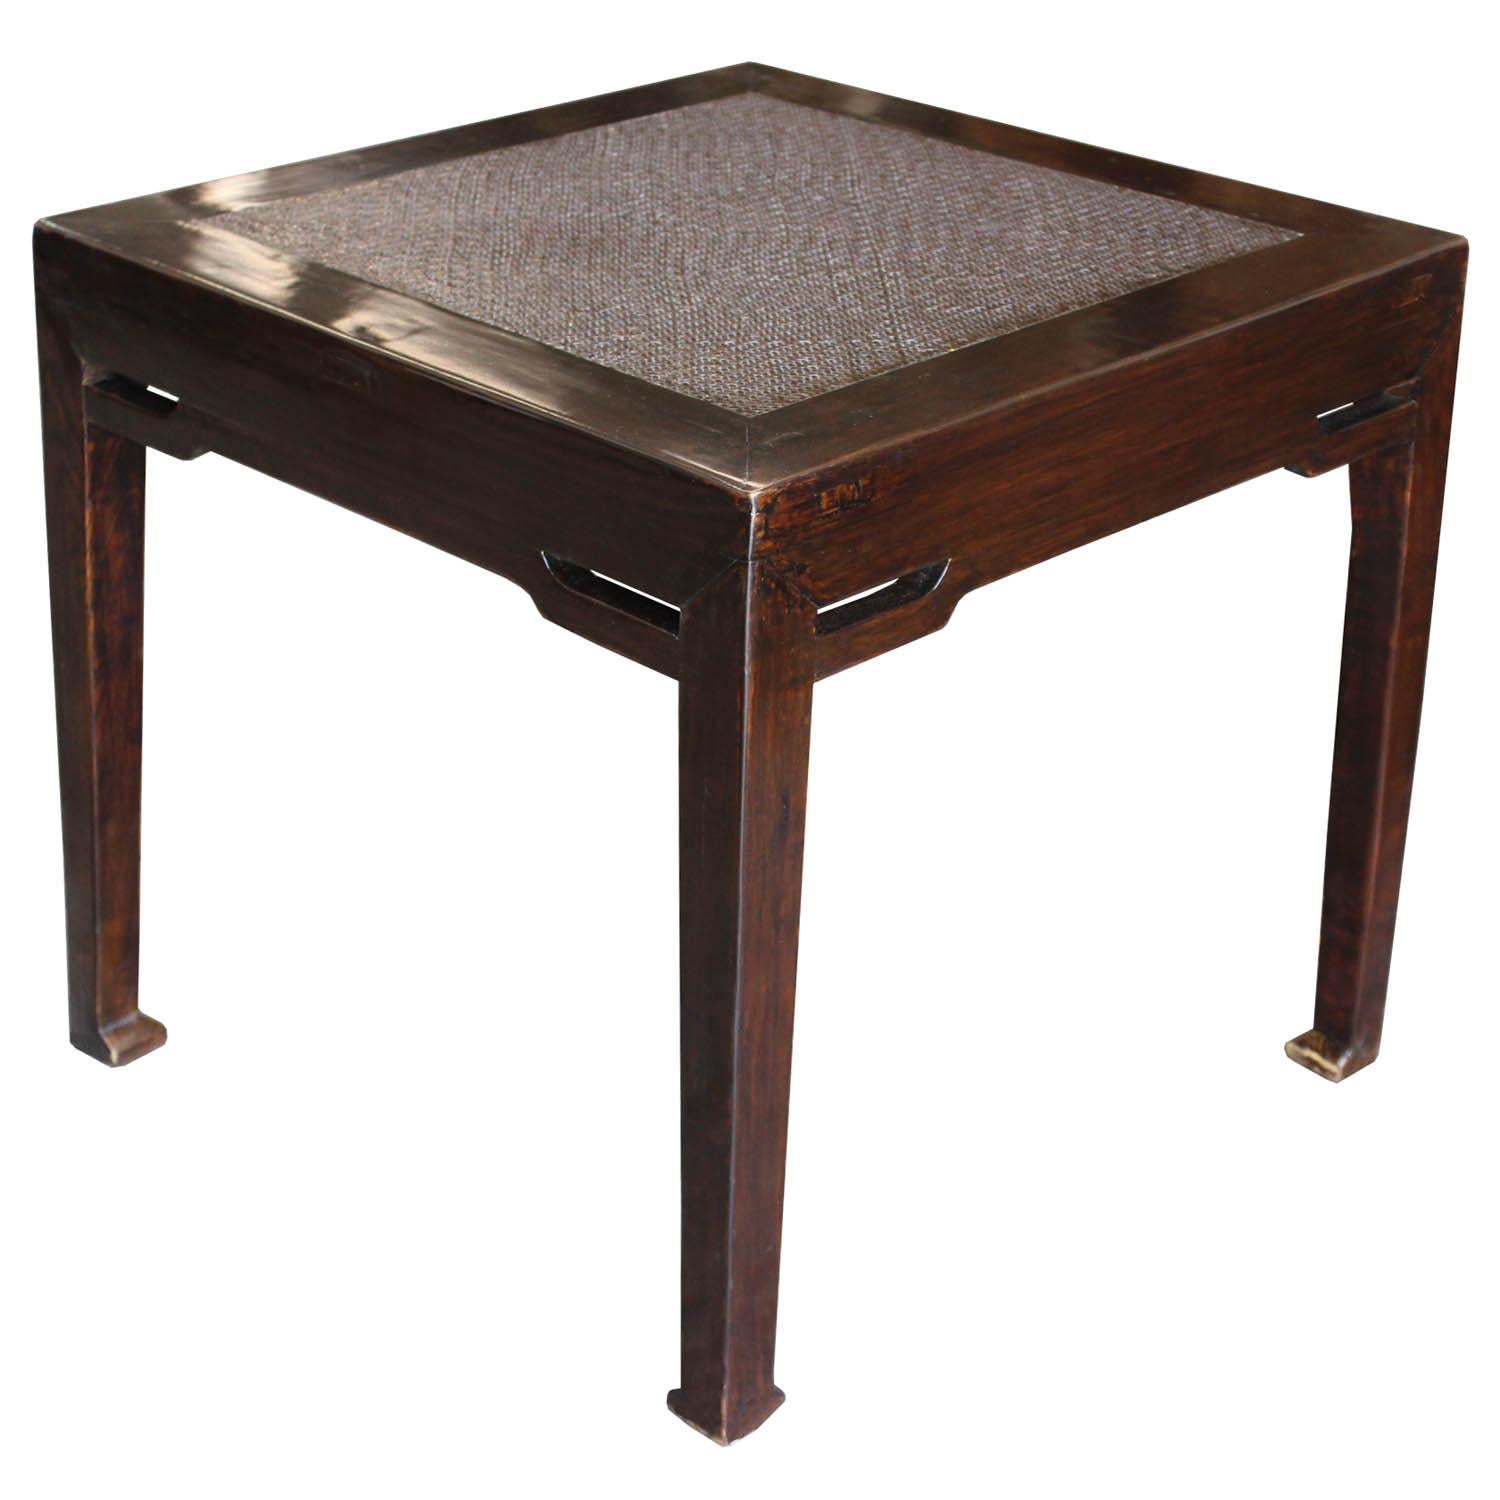 Elegant elmwood Ming tables with horse hoof-style feet and woven rattan top can be used as a coffee or side table in the living room.